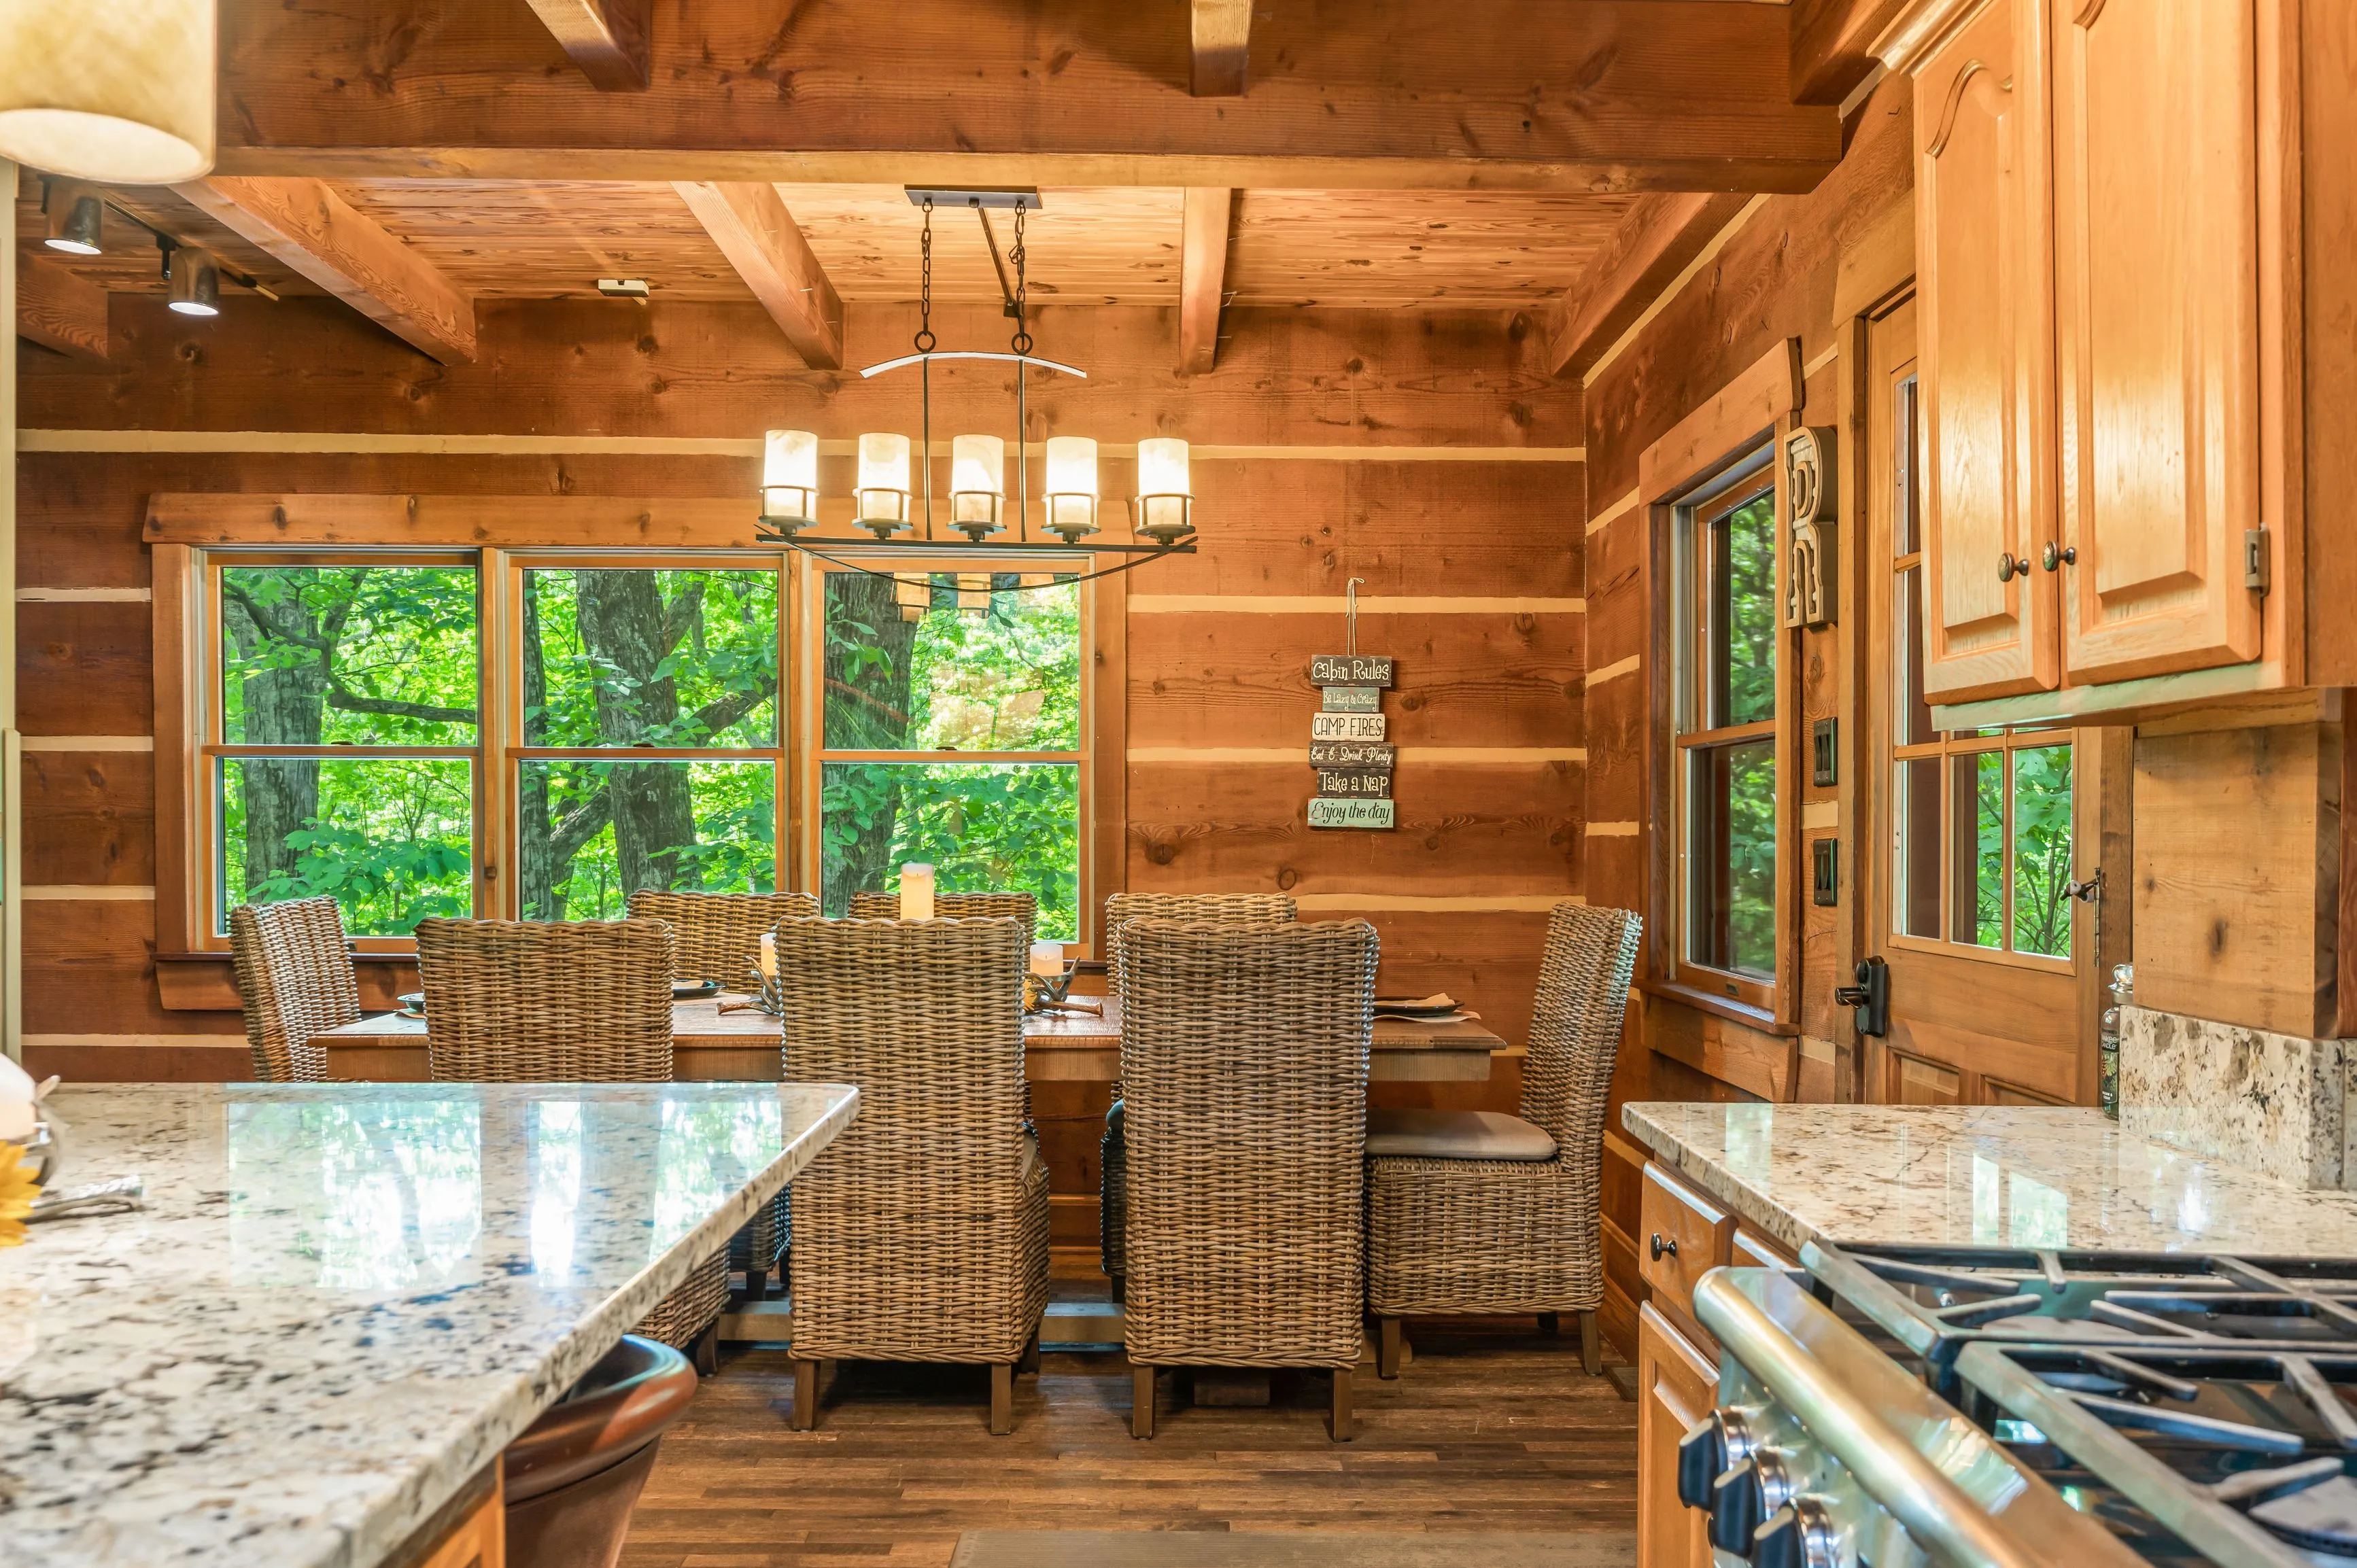 Rustic wooden kitchen interior with a dining table set for six, wicker chairs, granite countertops, and a forest view through large windows.